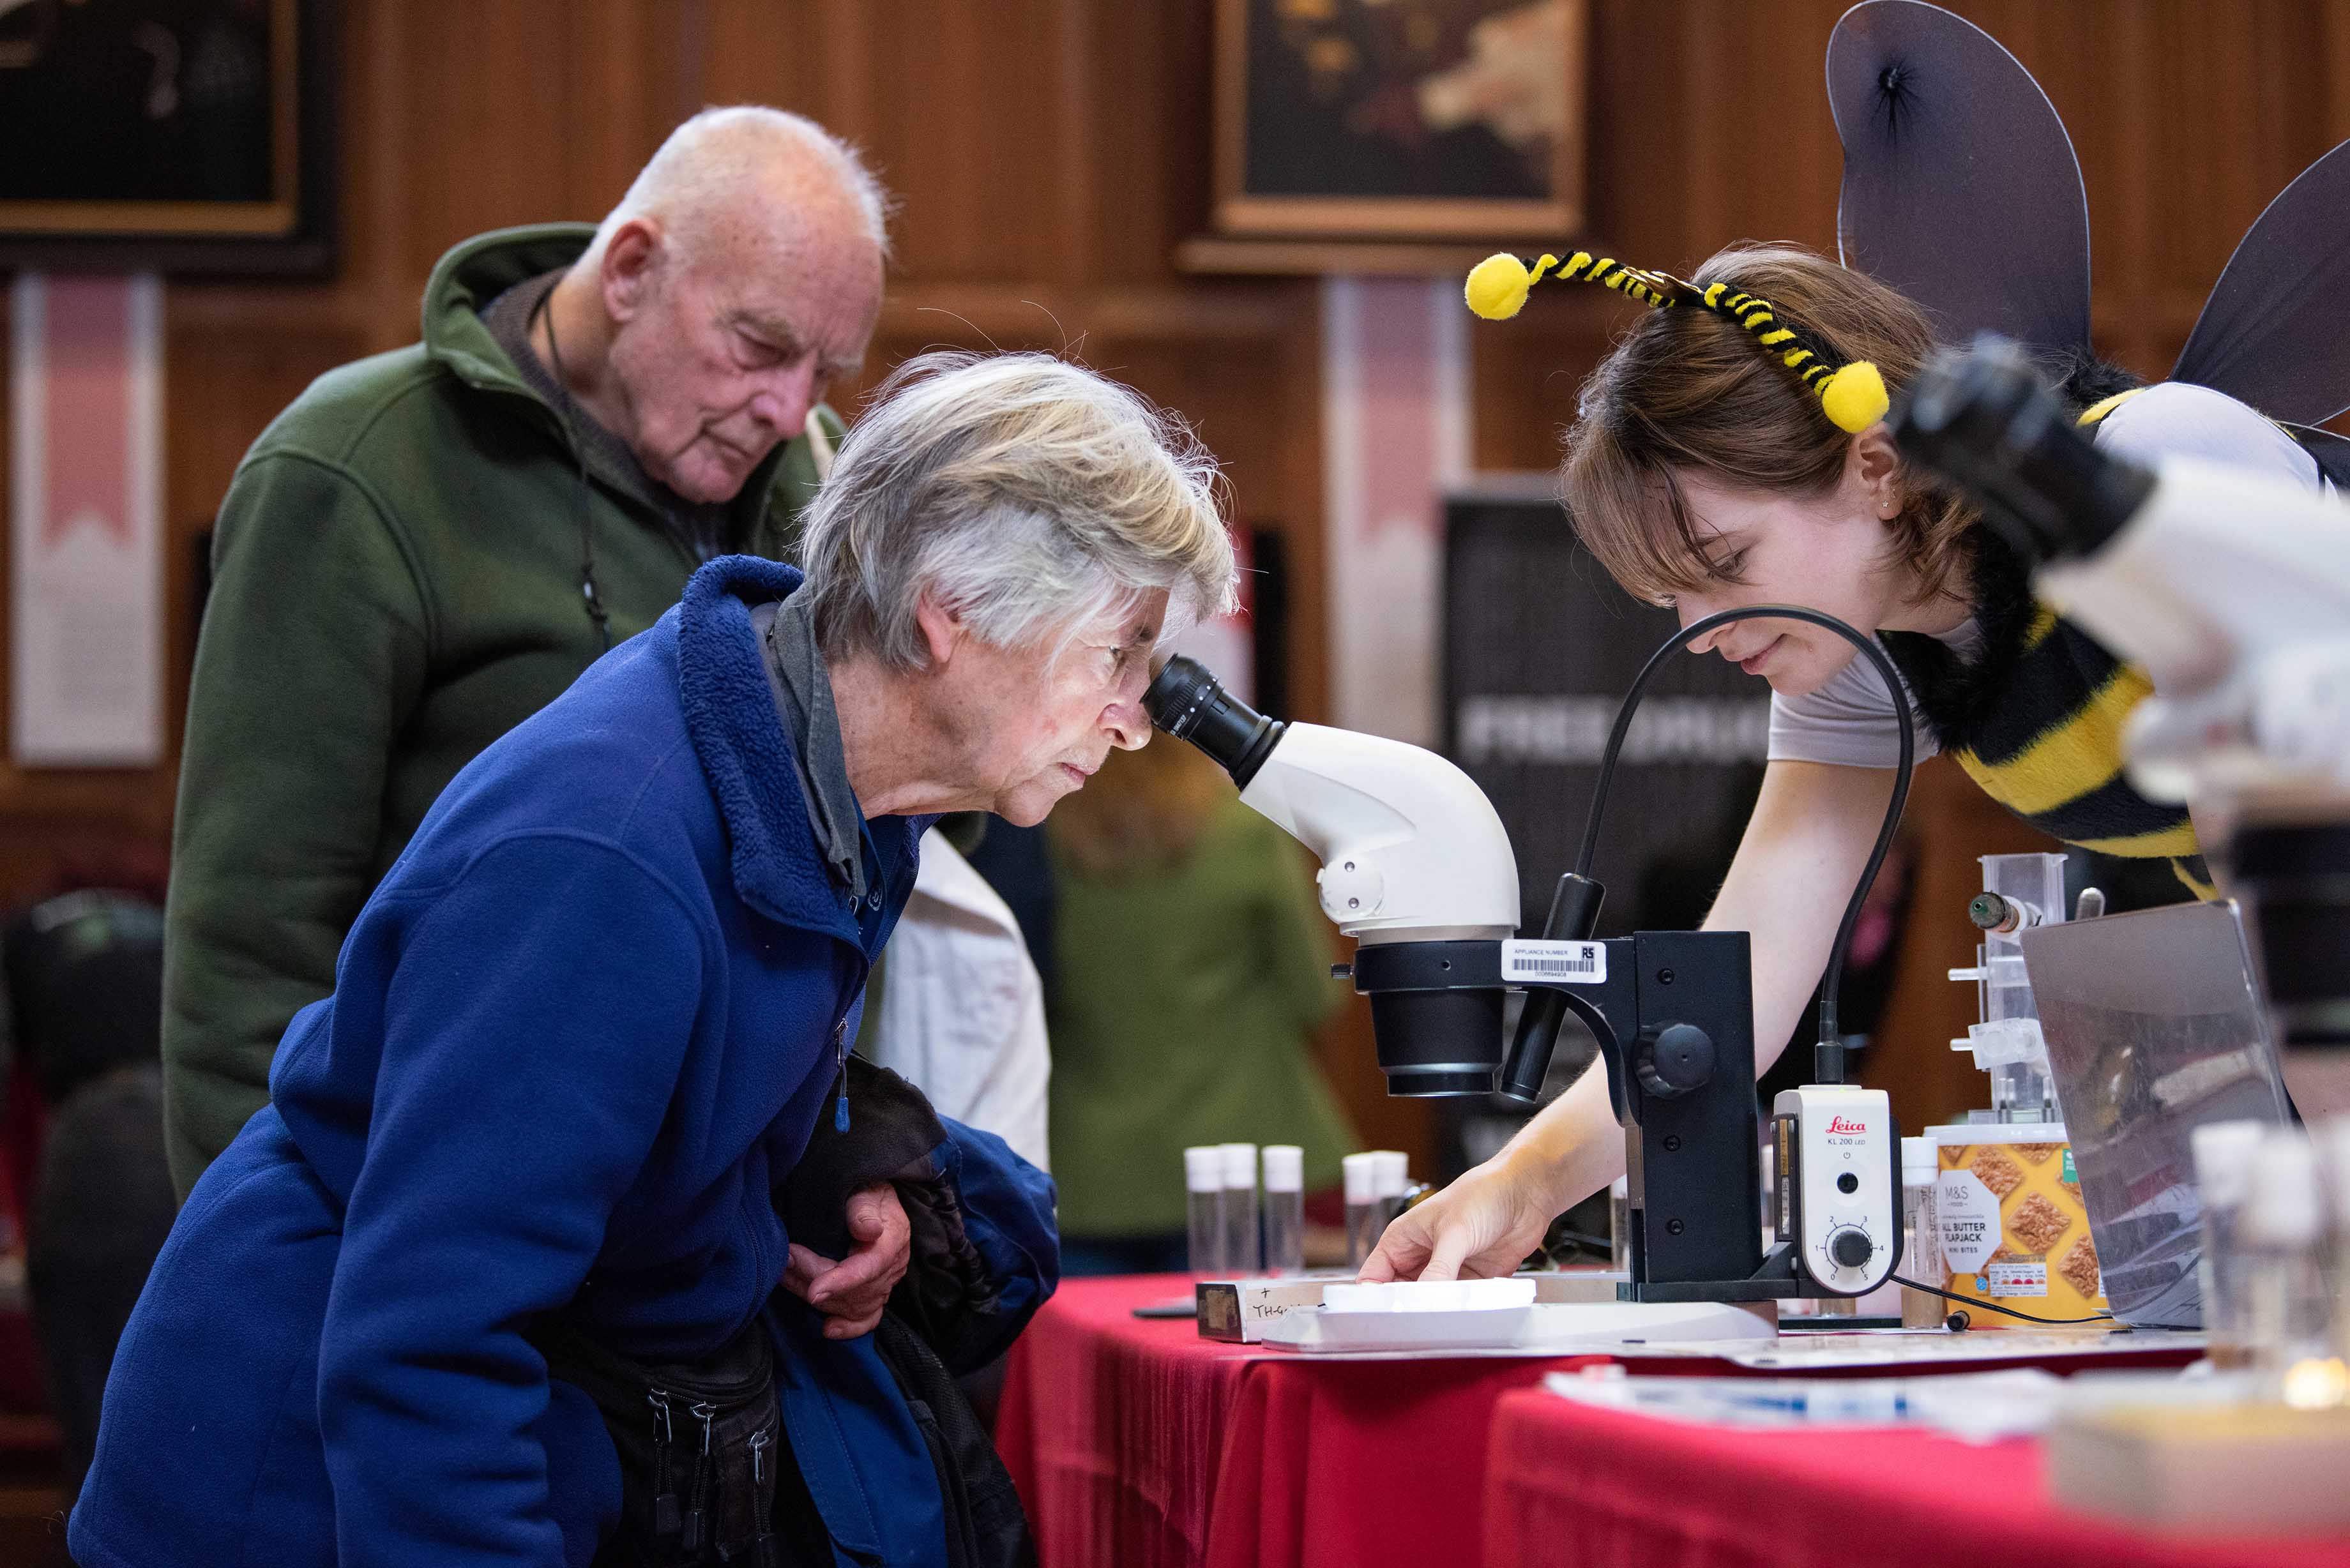 A member of the public looking through a microscope